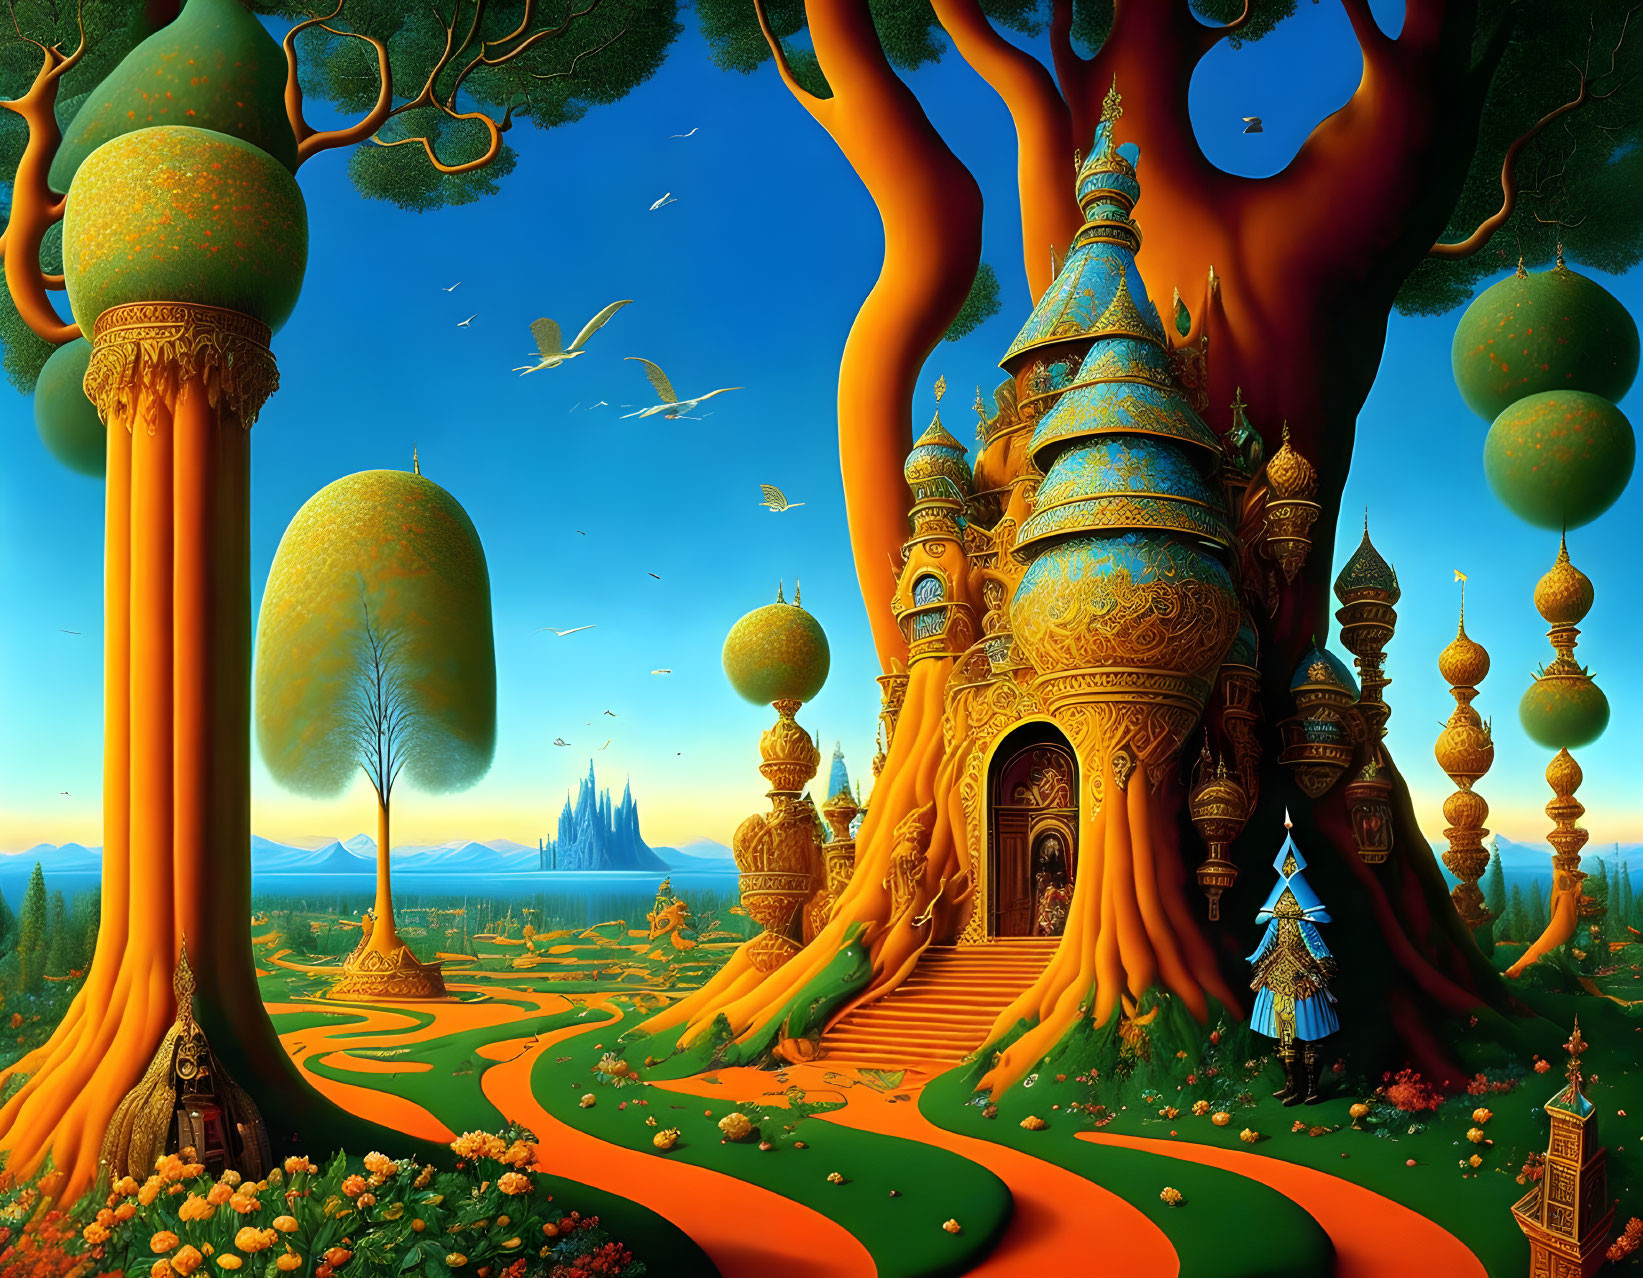 Fantasy landscape with whimsical trees, ornate towers, and figure in blue